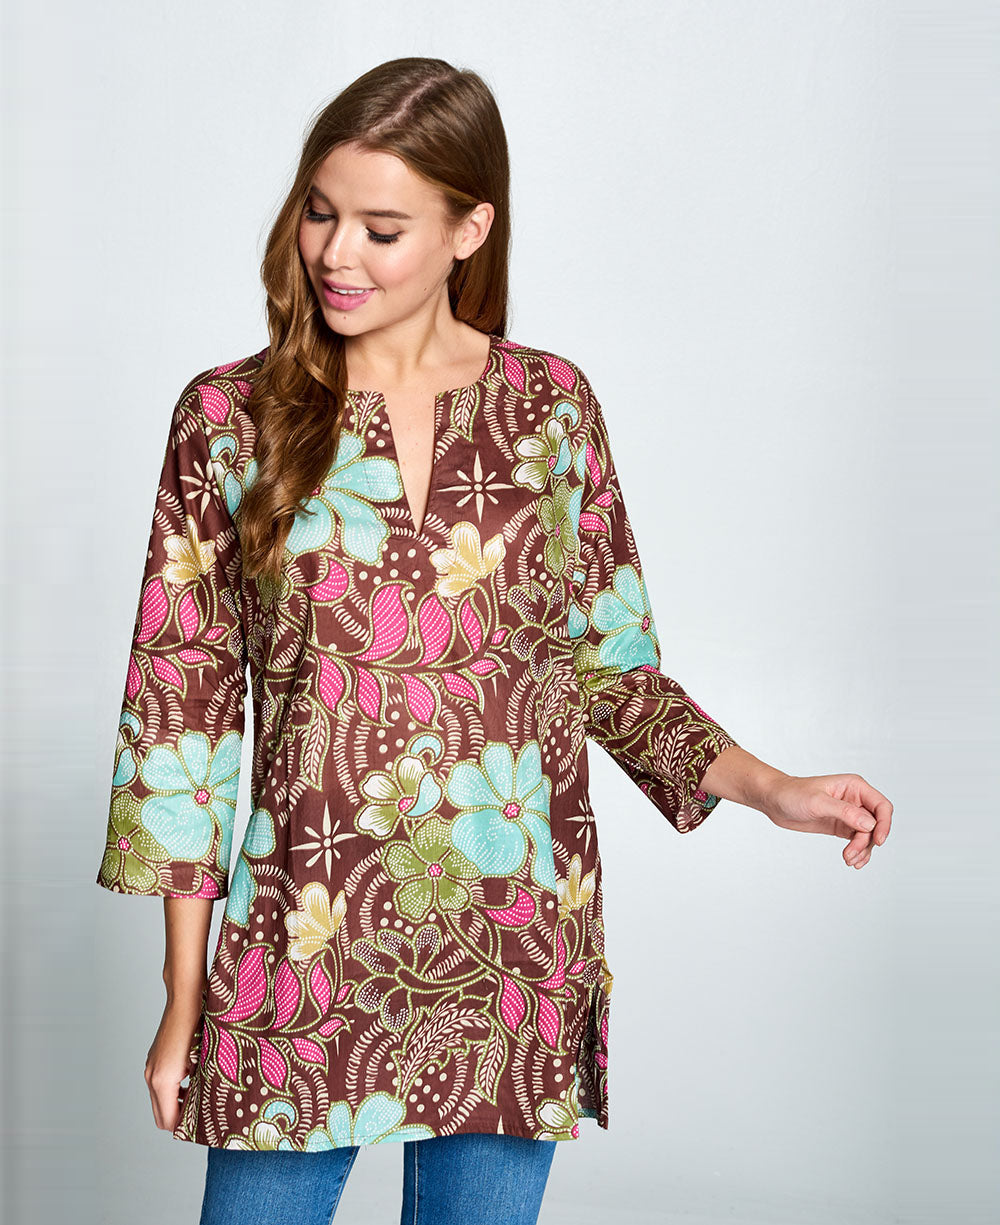 Earth and Blossoms Cotton Tunic, India – Cultural Elements